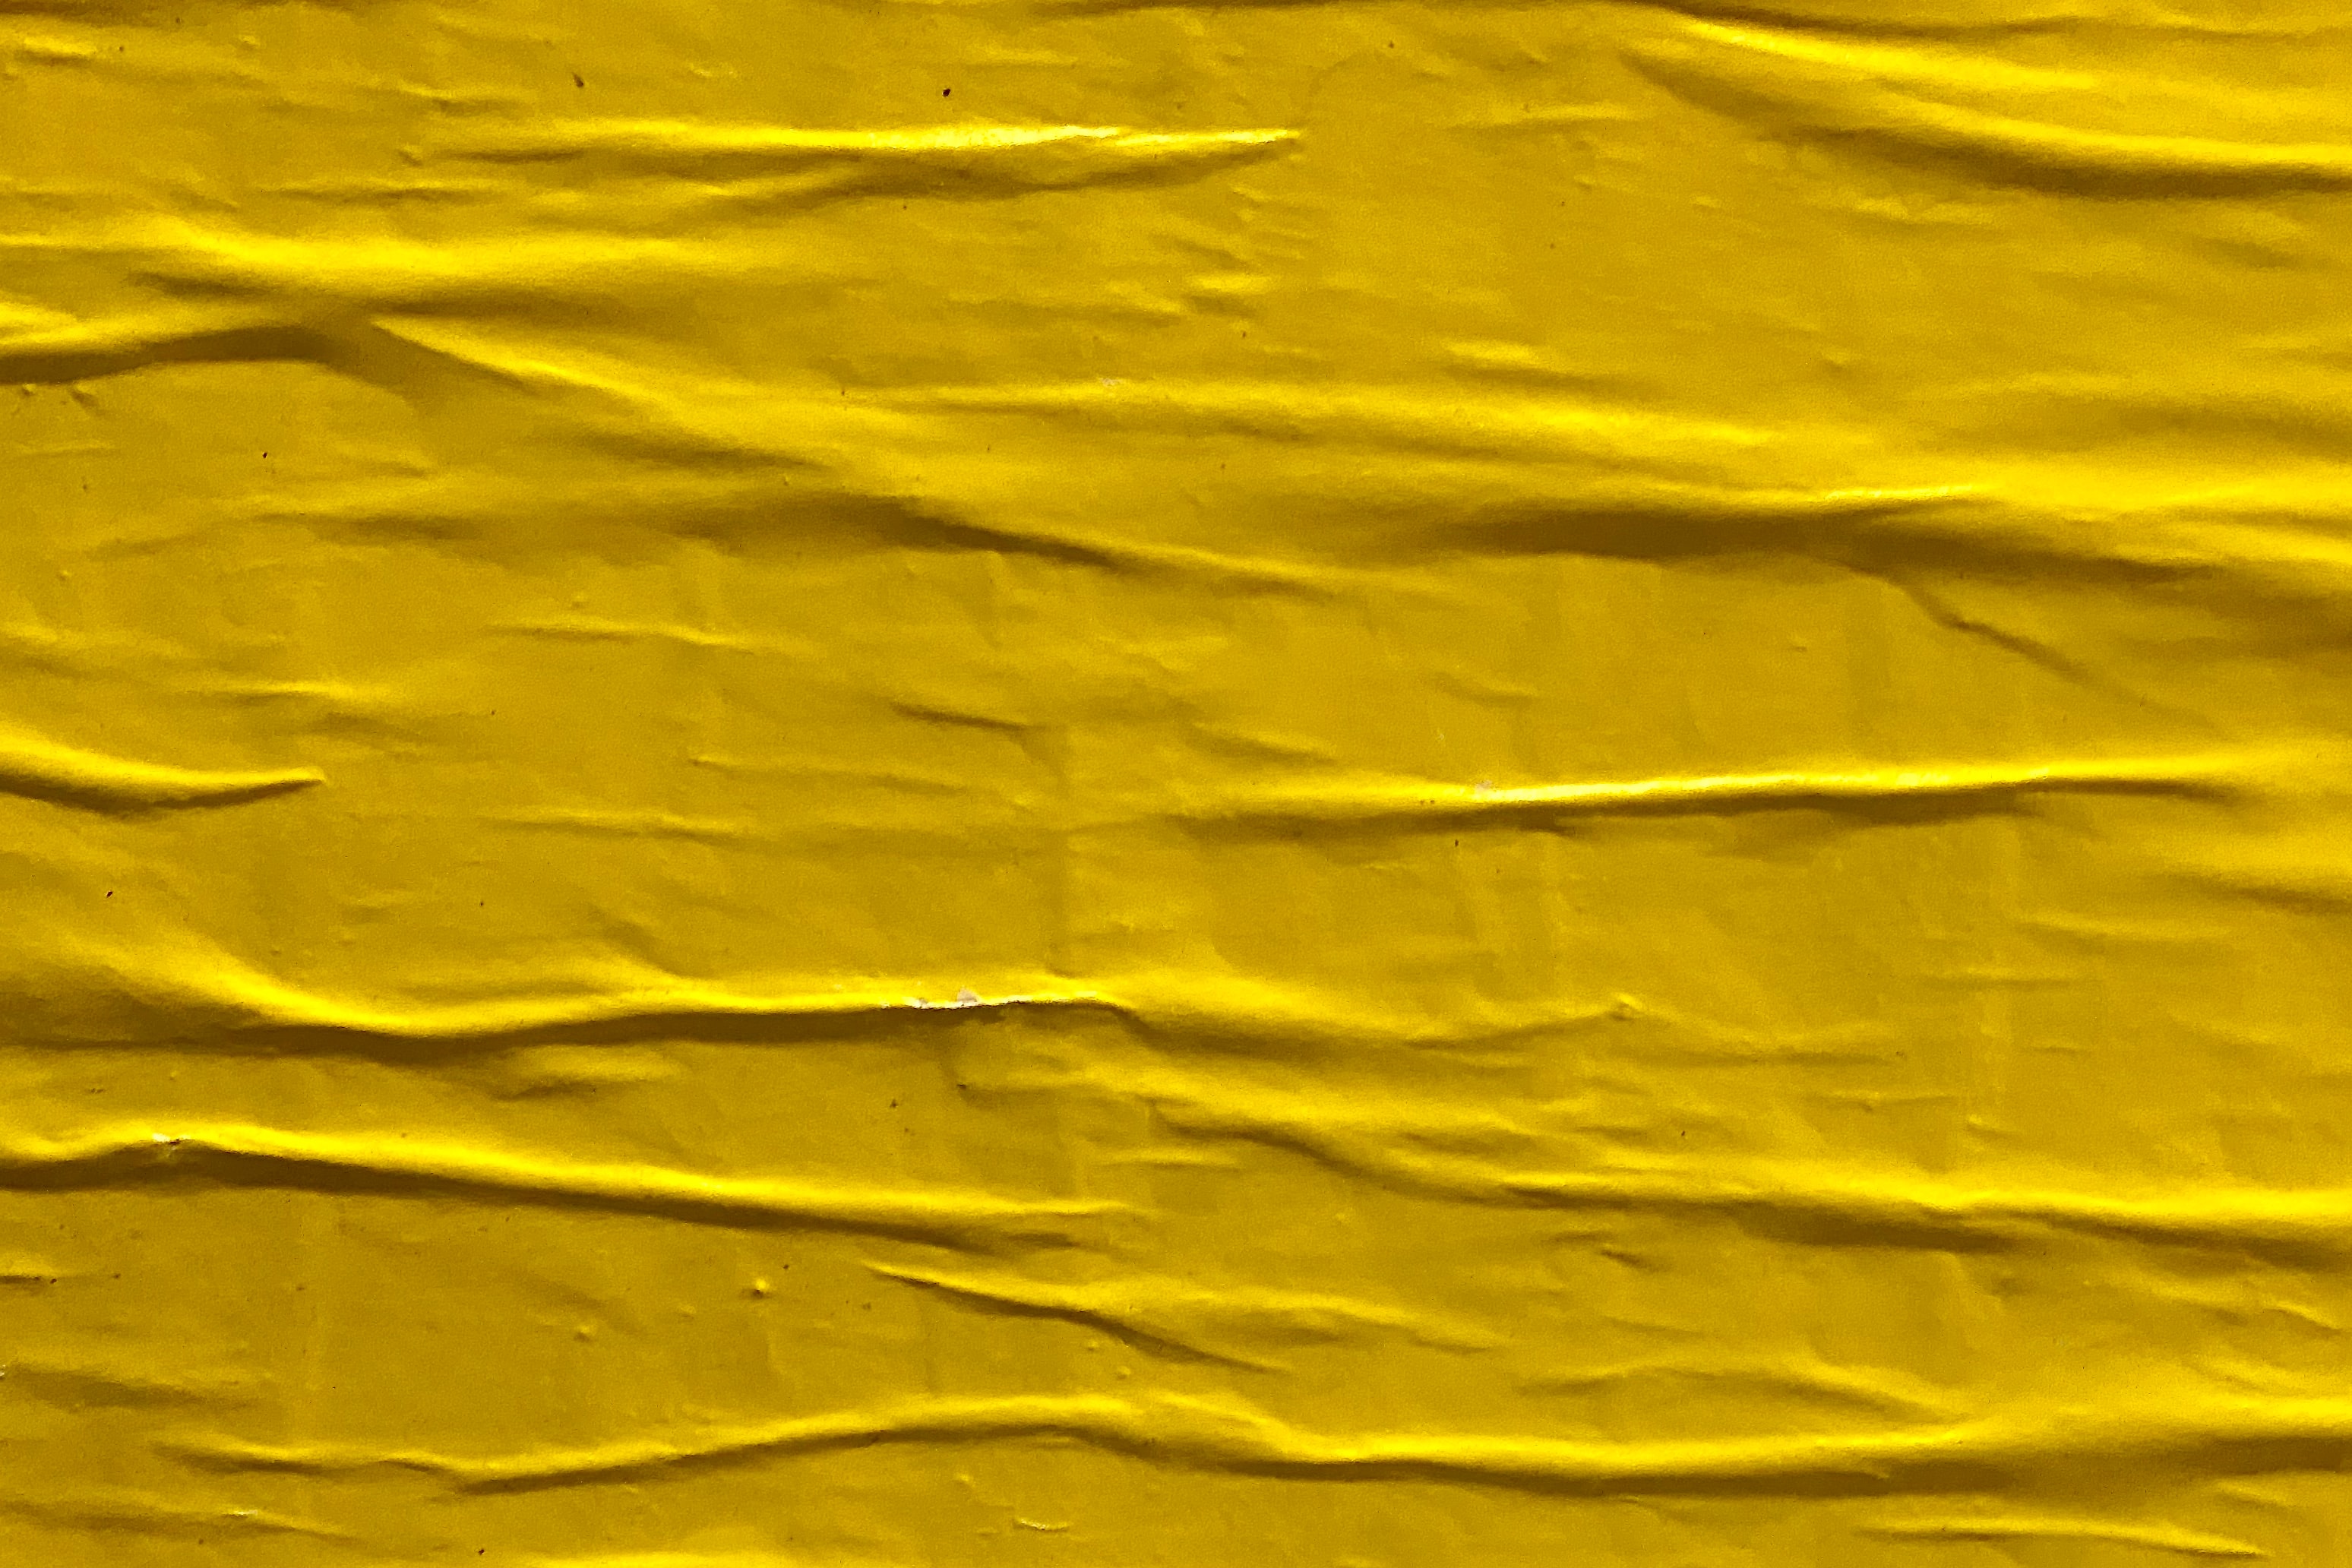 yellow, texture, textures, surface, paper, folds, pleating